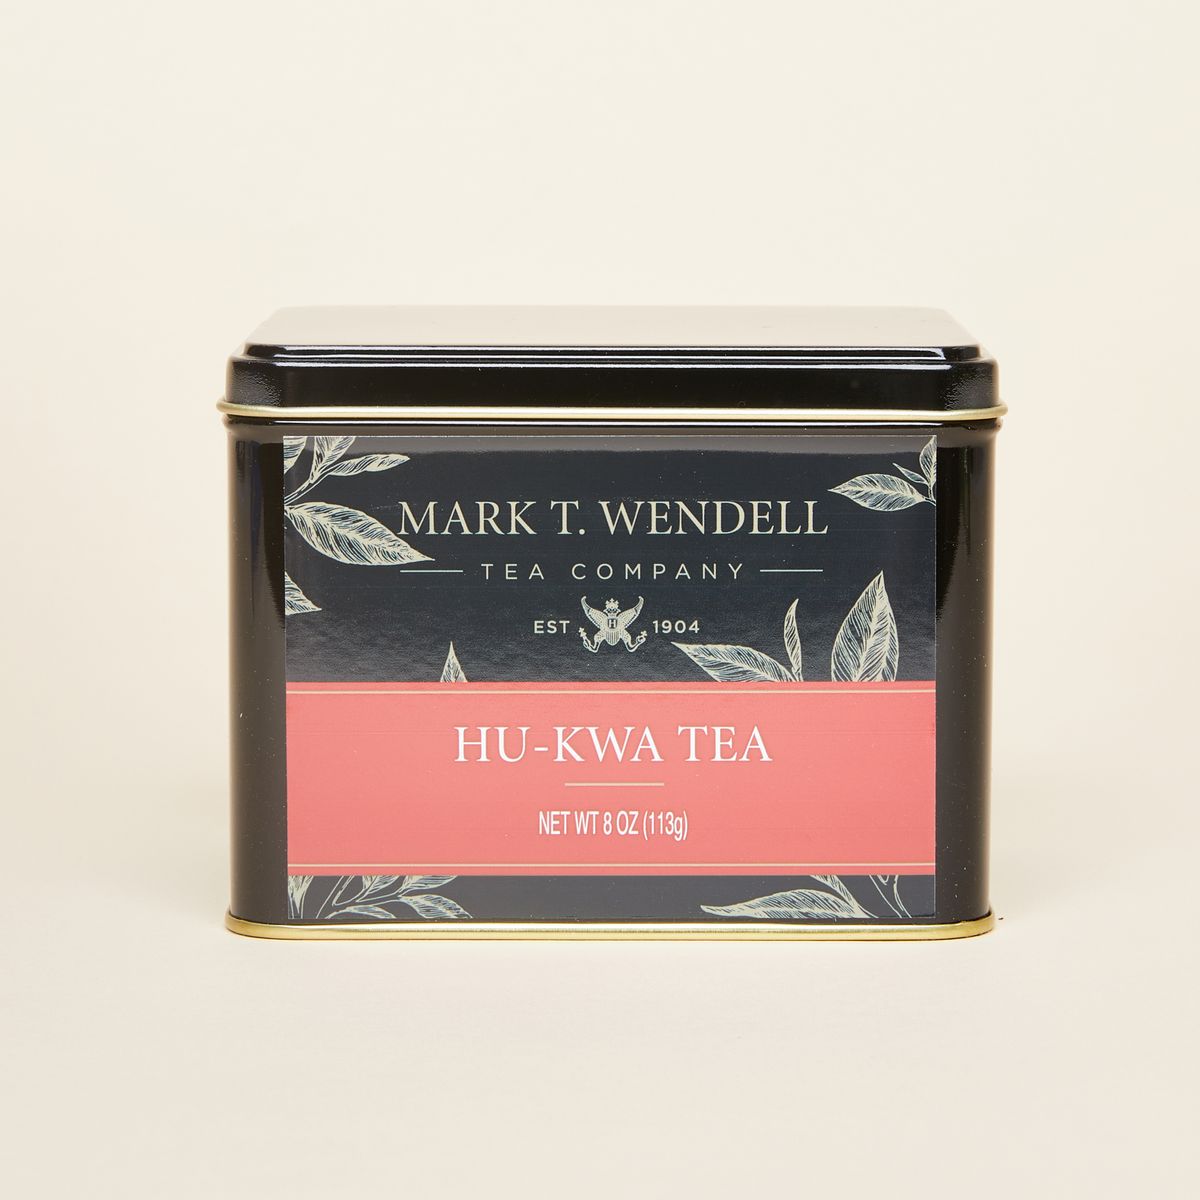 A small pile of black tea sits beside a tin box in black with gold and red details. Words read "Mark T. Wendell Tea Company" and "Hu-Kwa Tea"